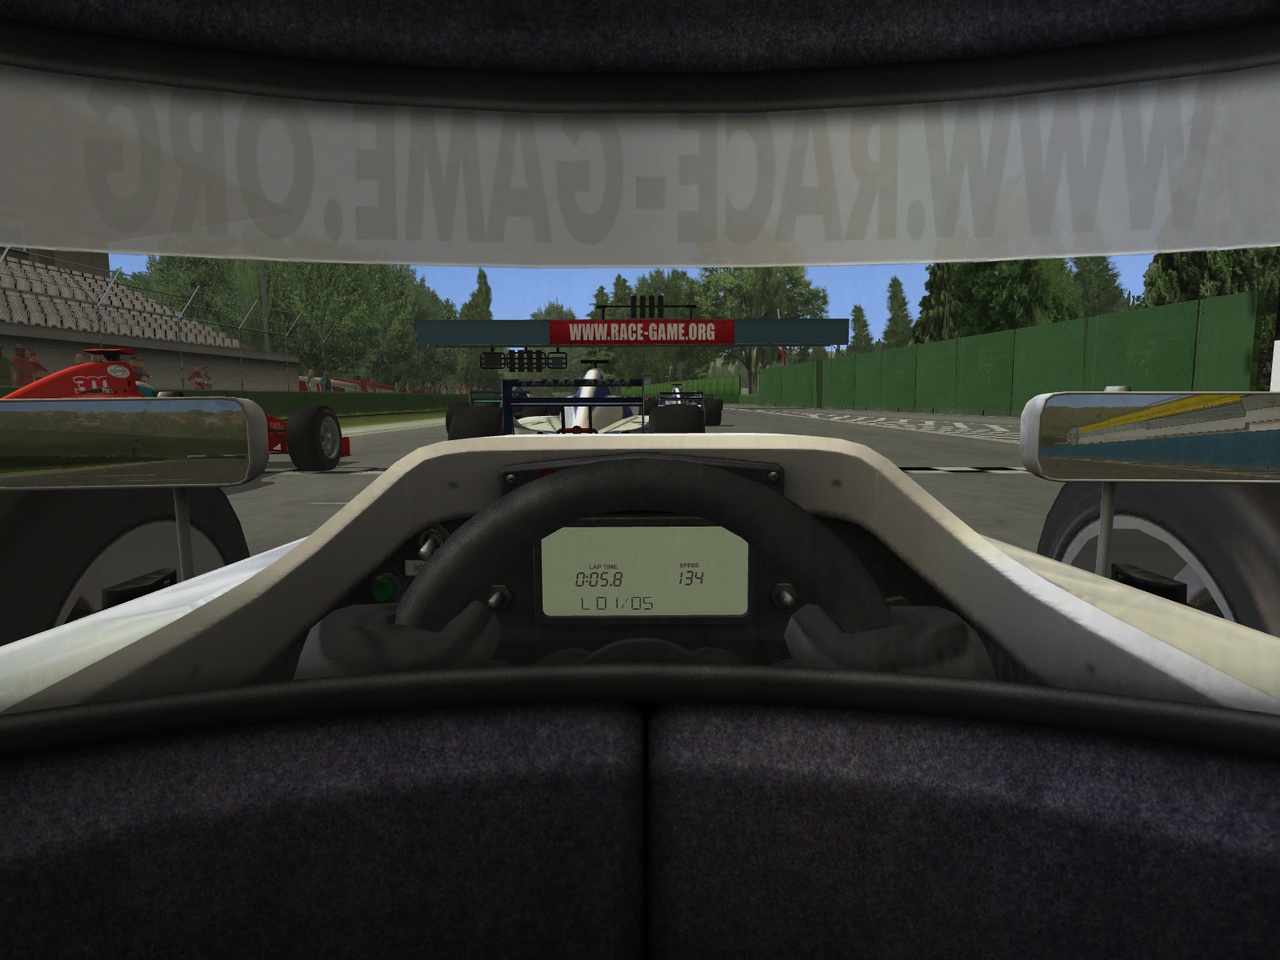 The in-helmet view brings an even more challenging edge to gameplay.